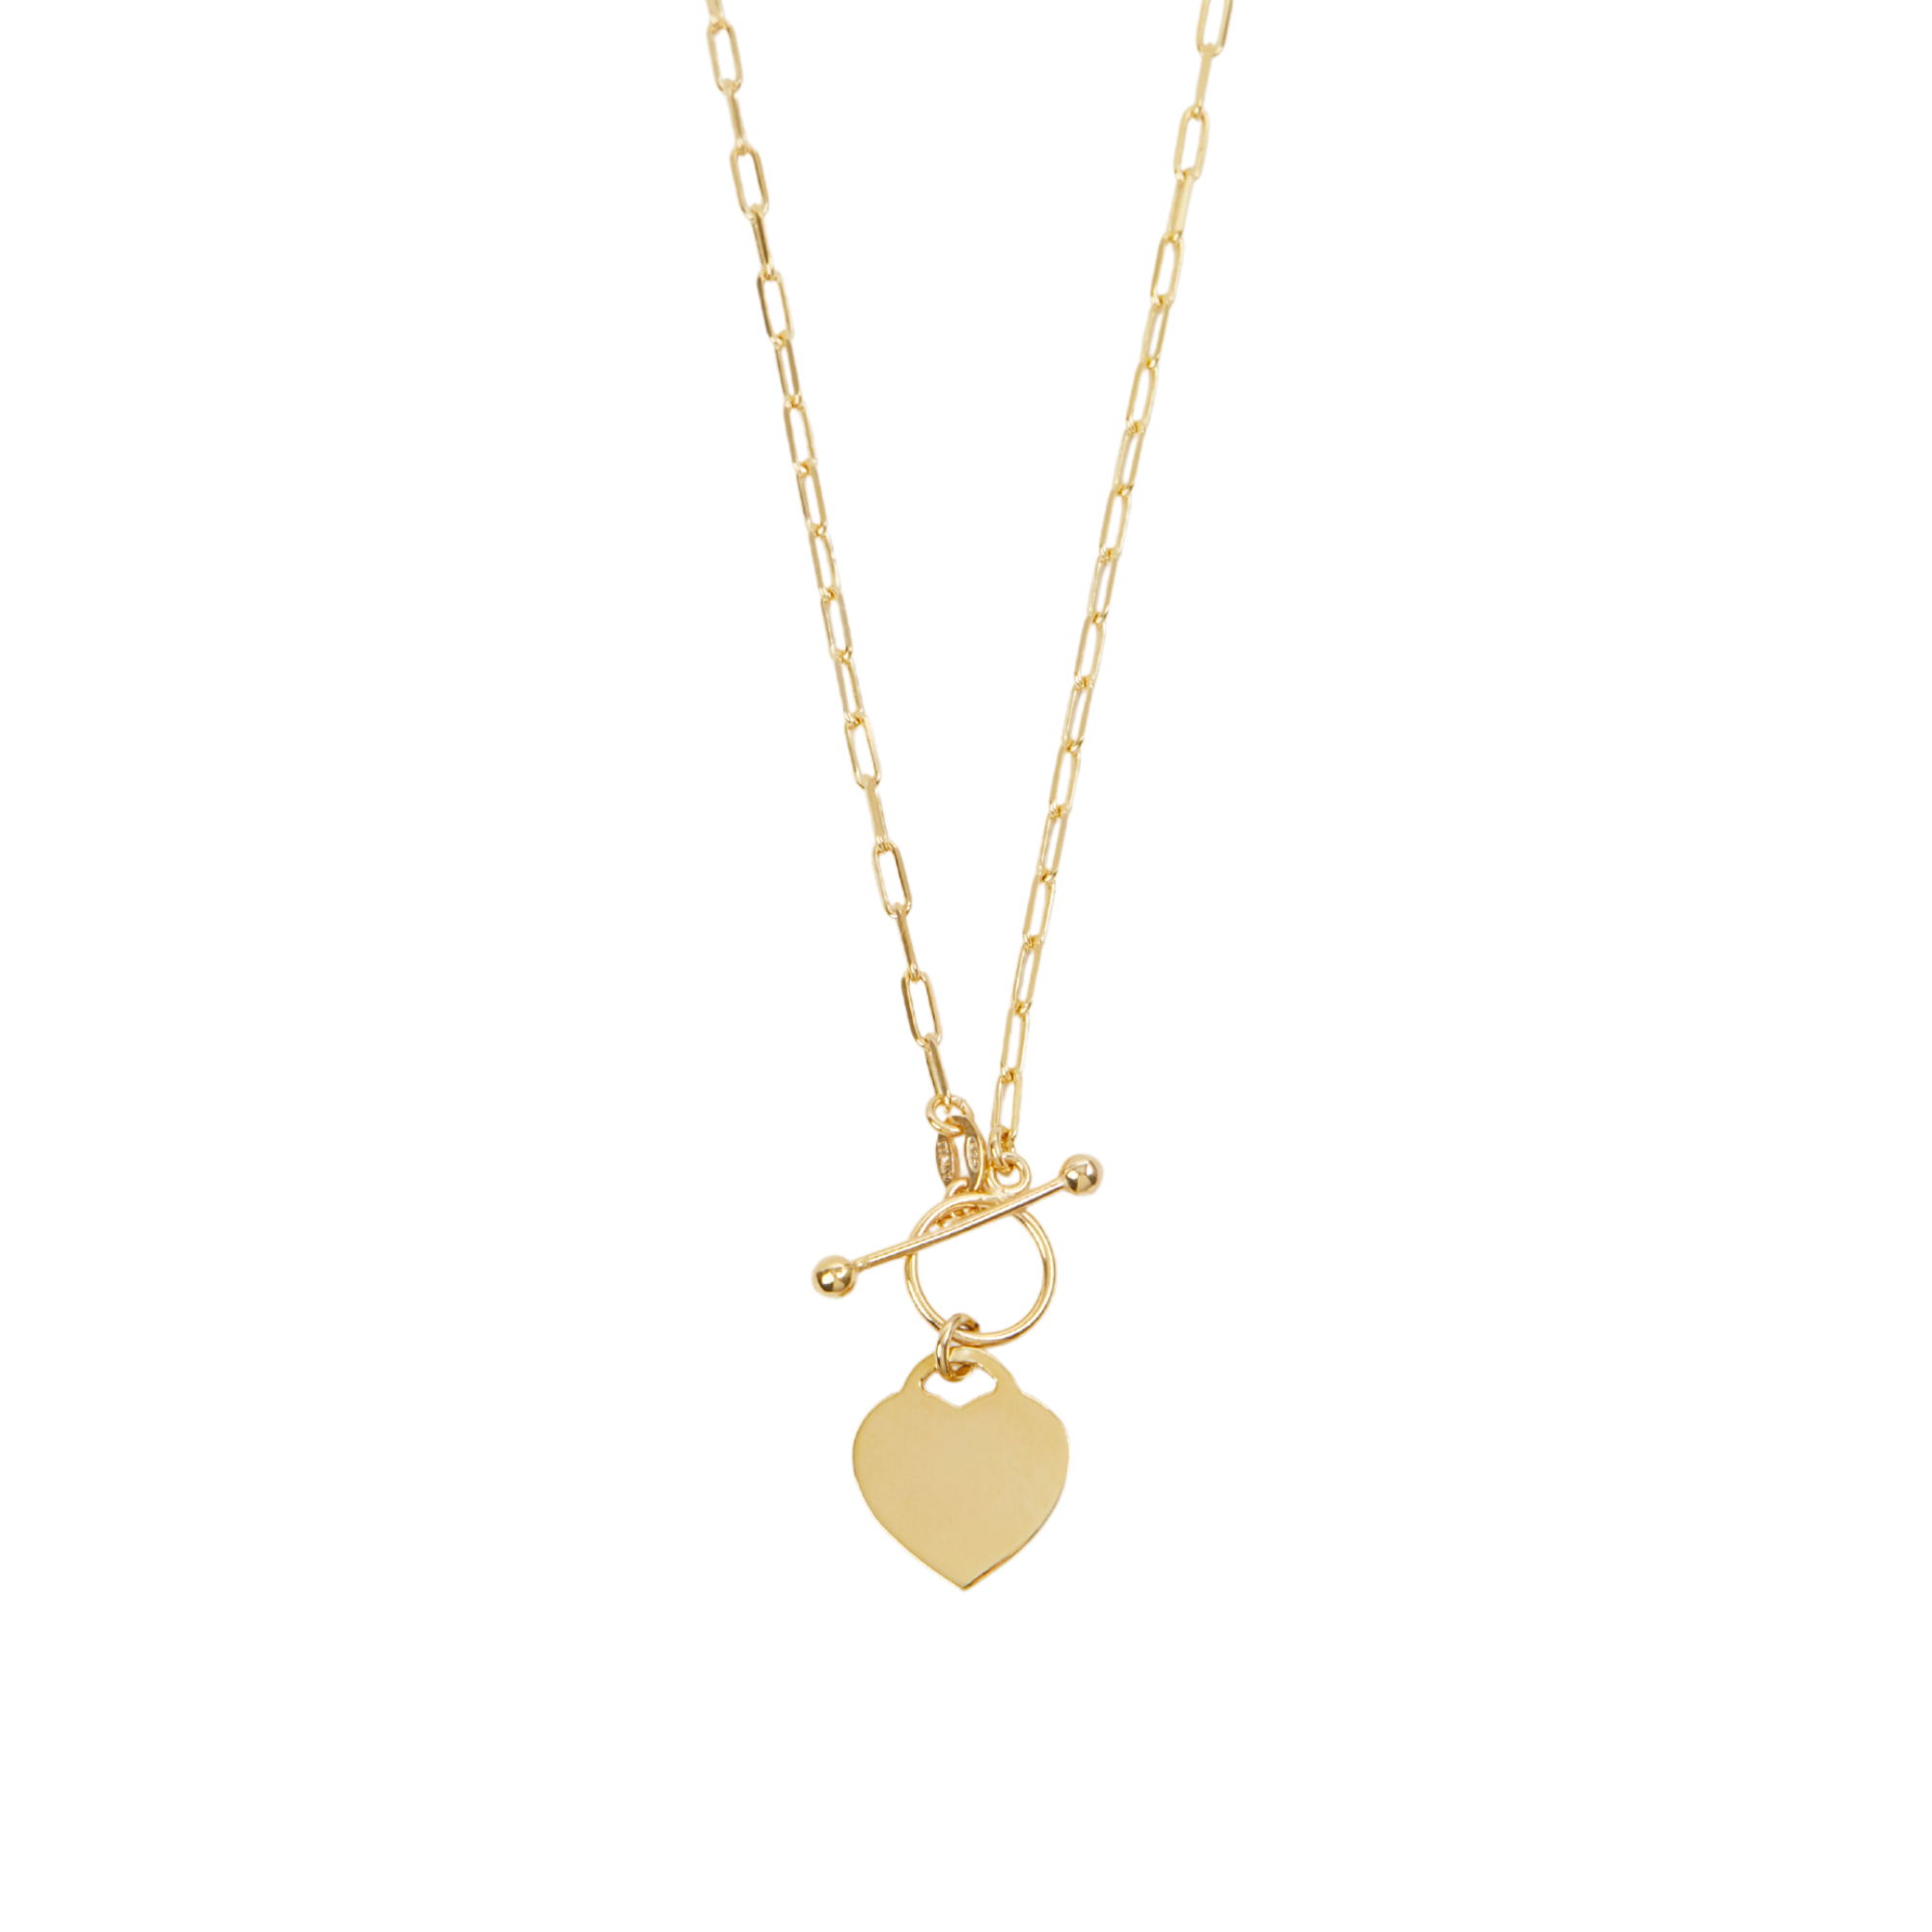 THE HEART TOGGLE NECKLACE